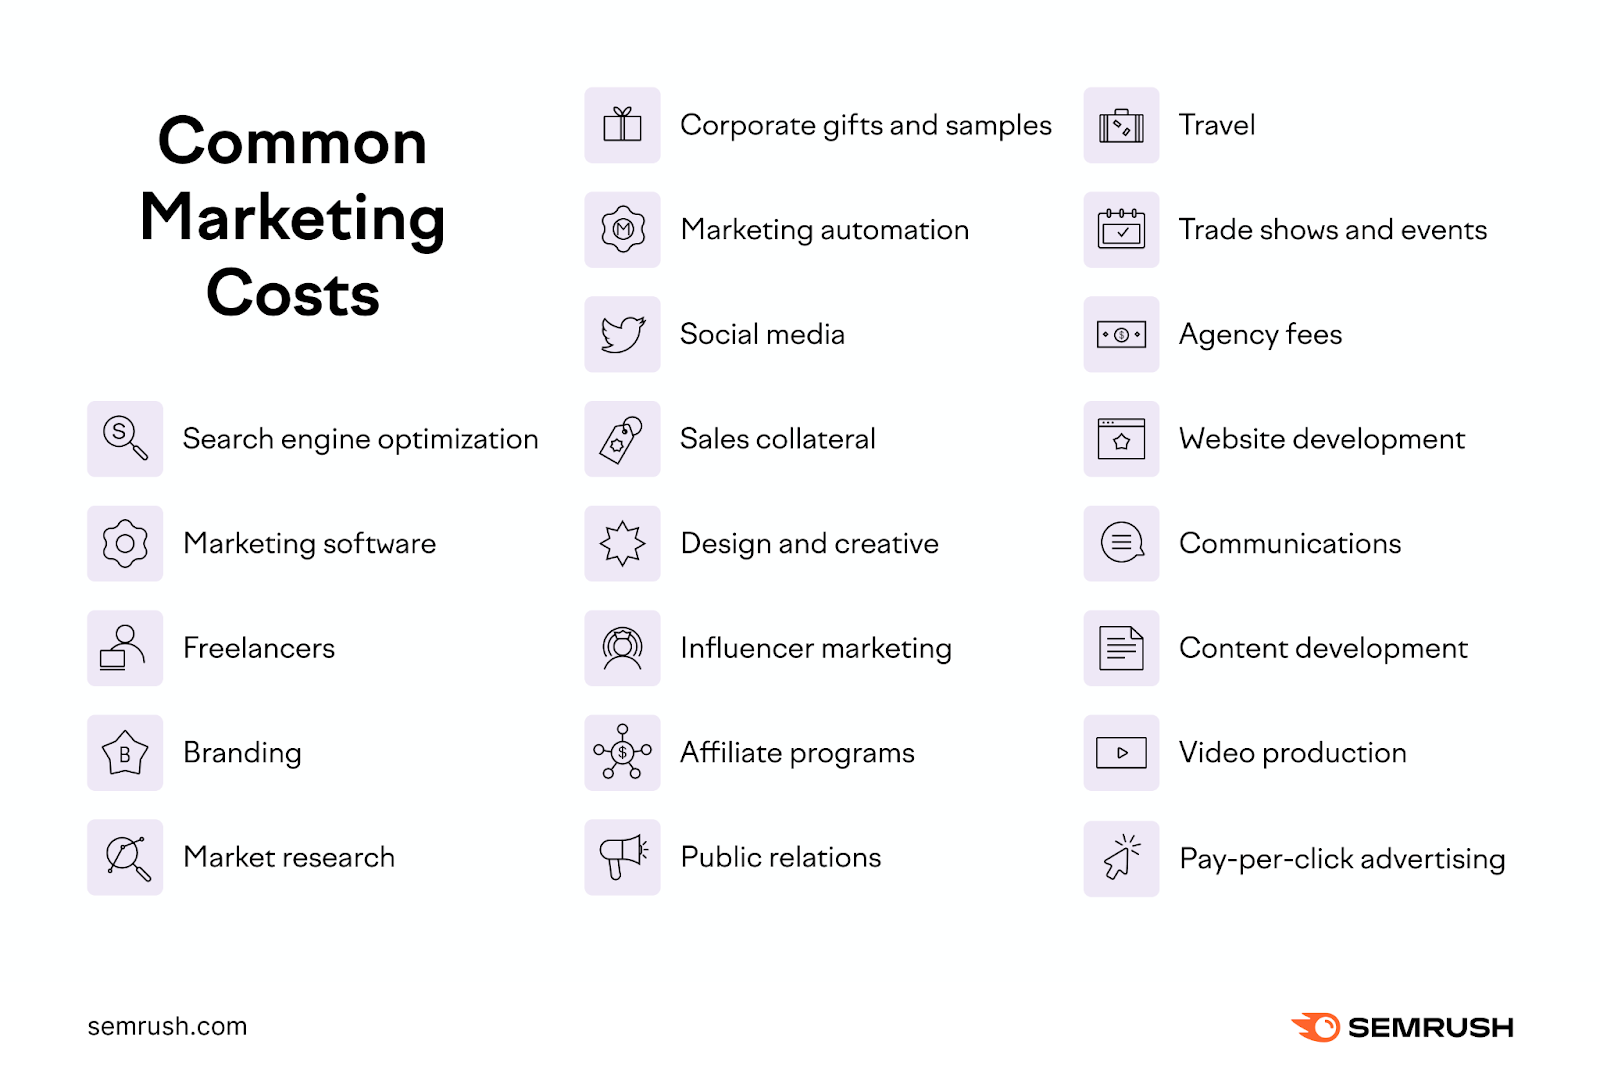 Common marketing costs are seo, software, freelancers, branding, research, gifts, automation, social media, sales collateral, design, influencers, affiliates, public relations, travel, events, agencies, website, communications, content, video, and advertising